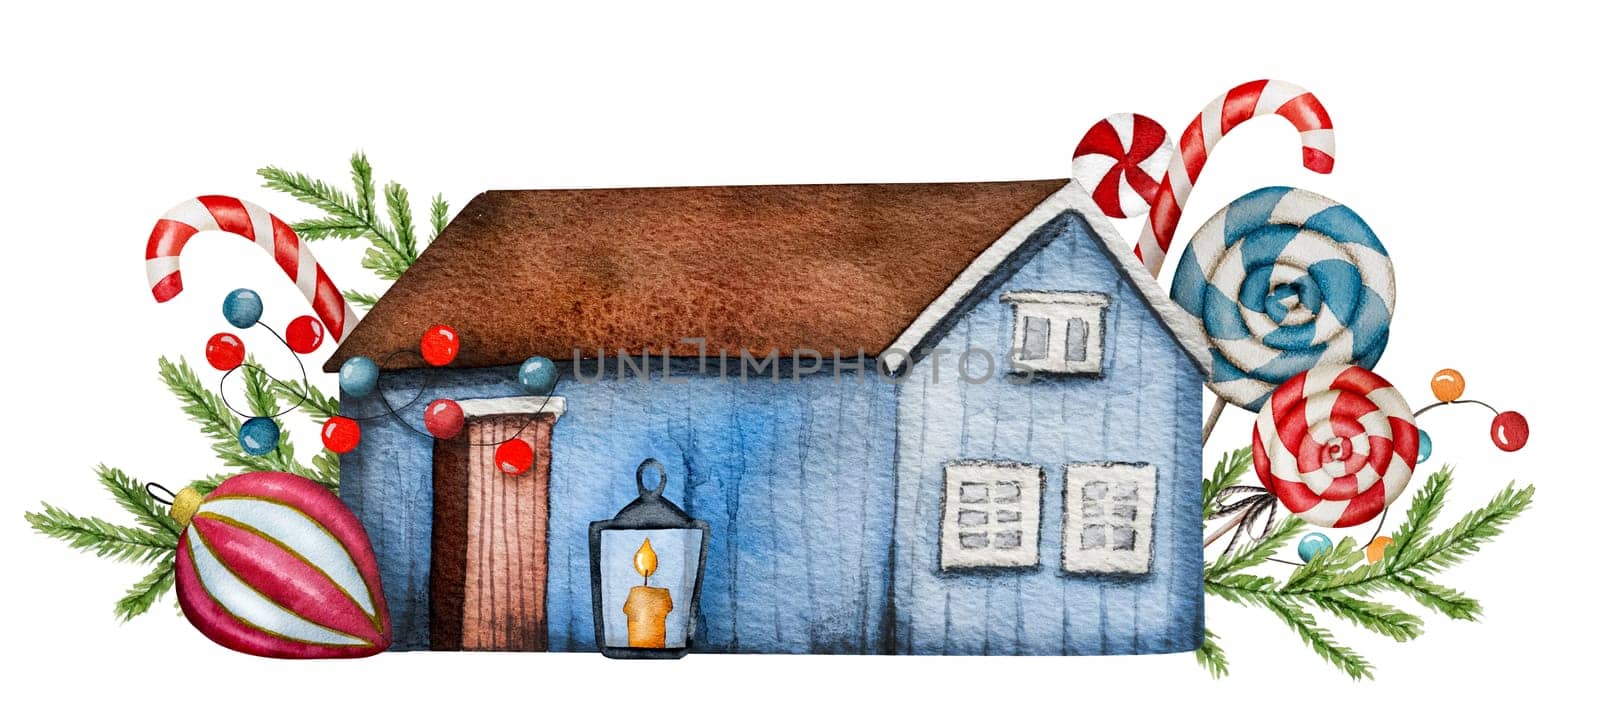 Watercolor Illustration Of Christmas Features A Cute Little House, New Year Decorations, Candies, And Fir Branches